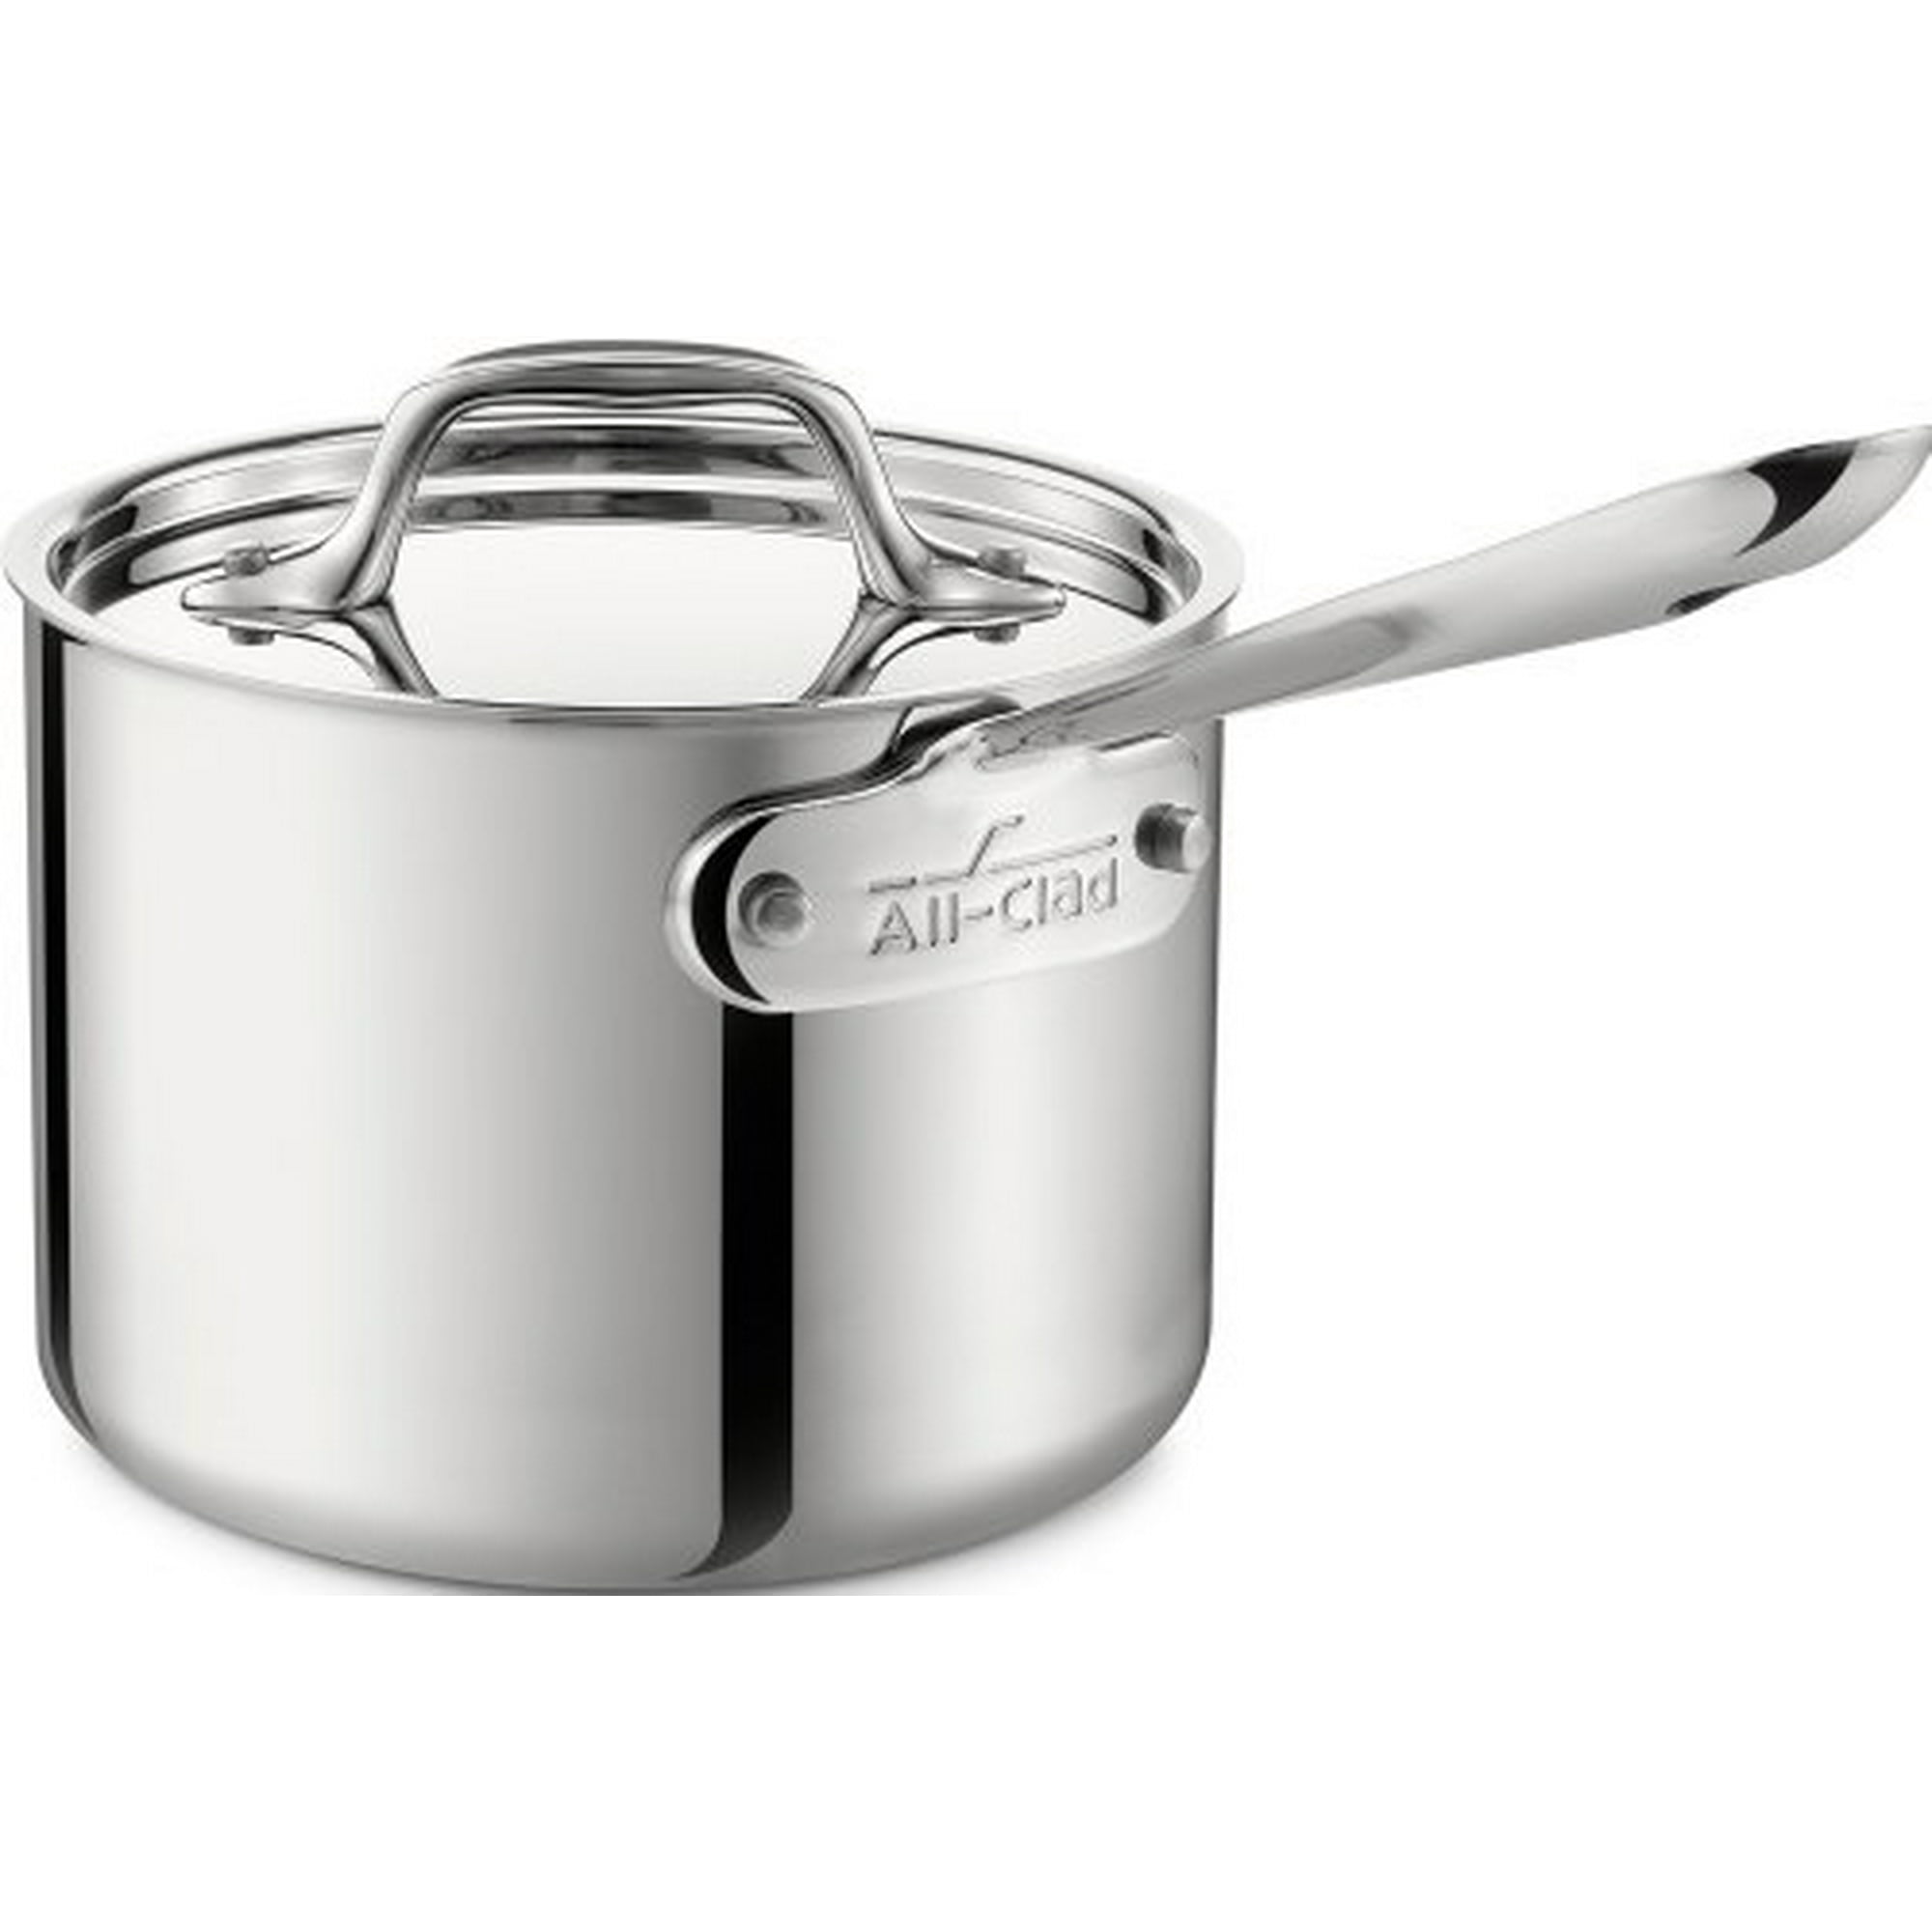 All Clad 4201 5 Stainless Steel Tri Ply Bonded Dishwasher Safe Sauce Pan With Lid Cookware 1 5 Quart Silver Walmart Canada